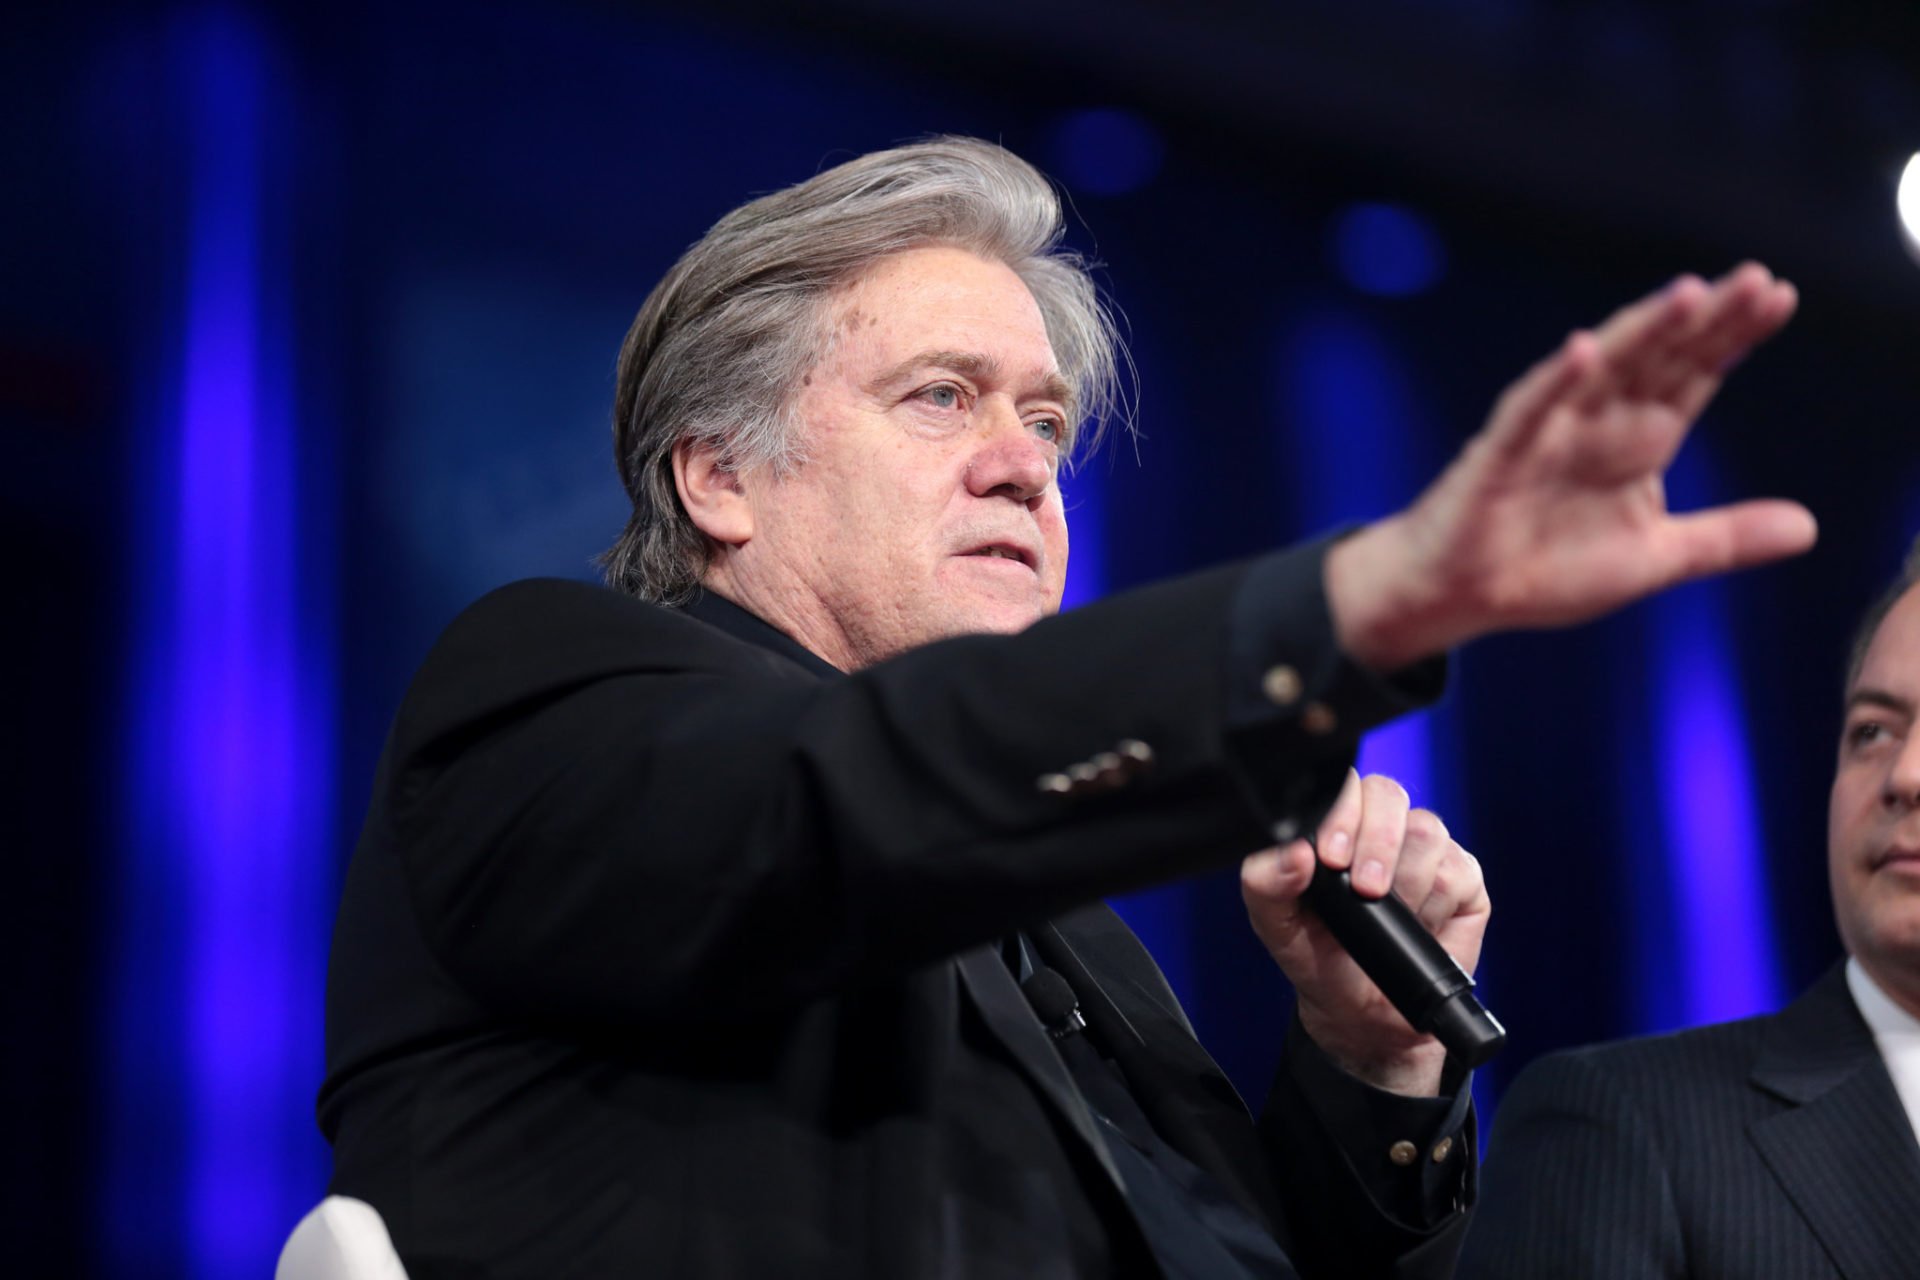 Steve Bannon To Release Utility Tokens for the Populist Movement